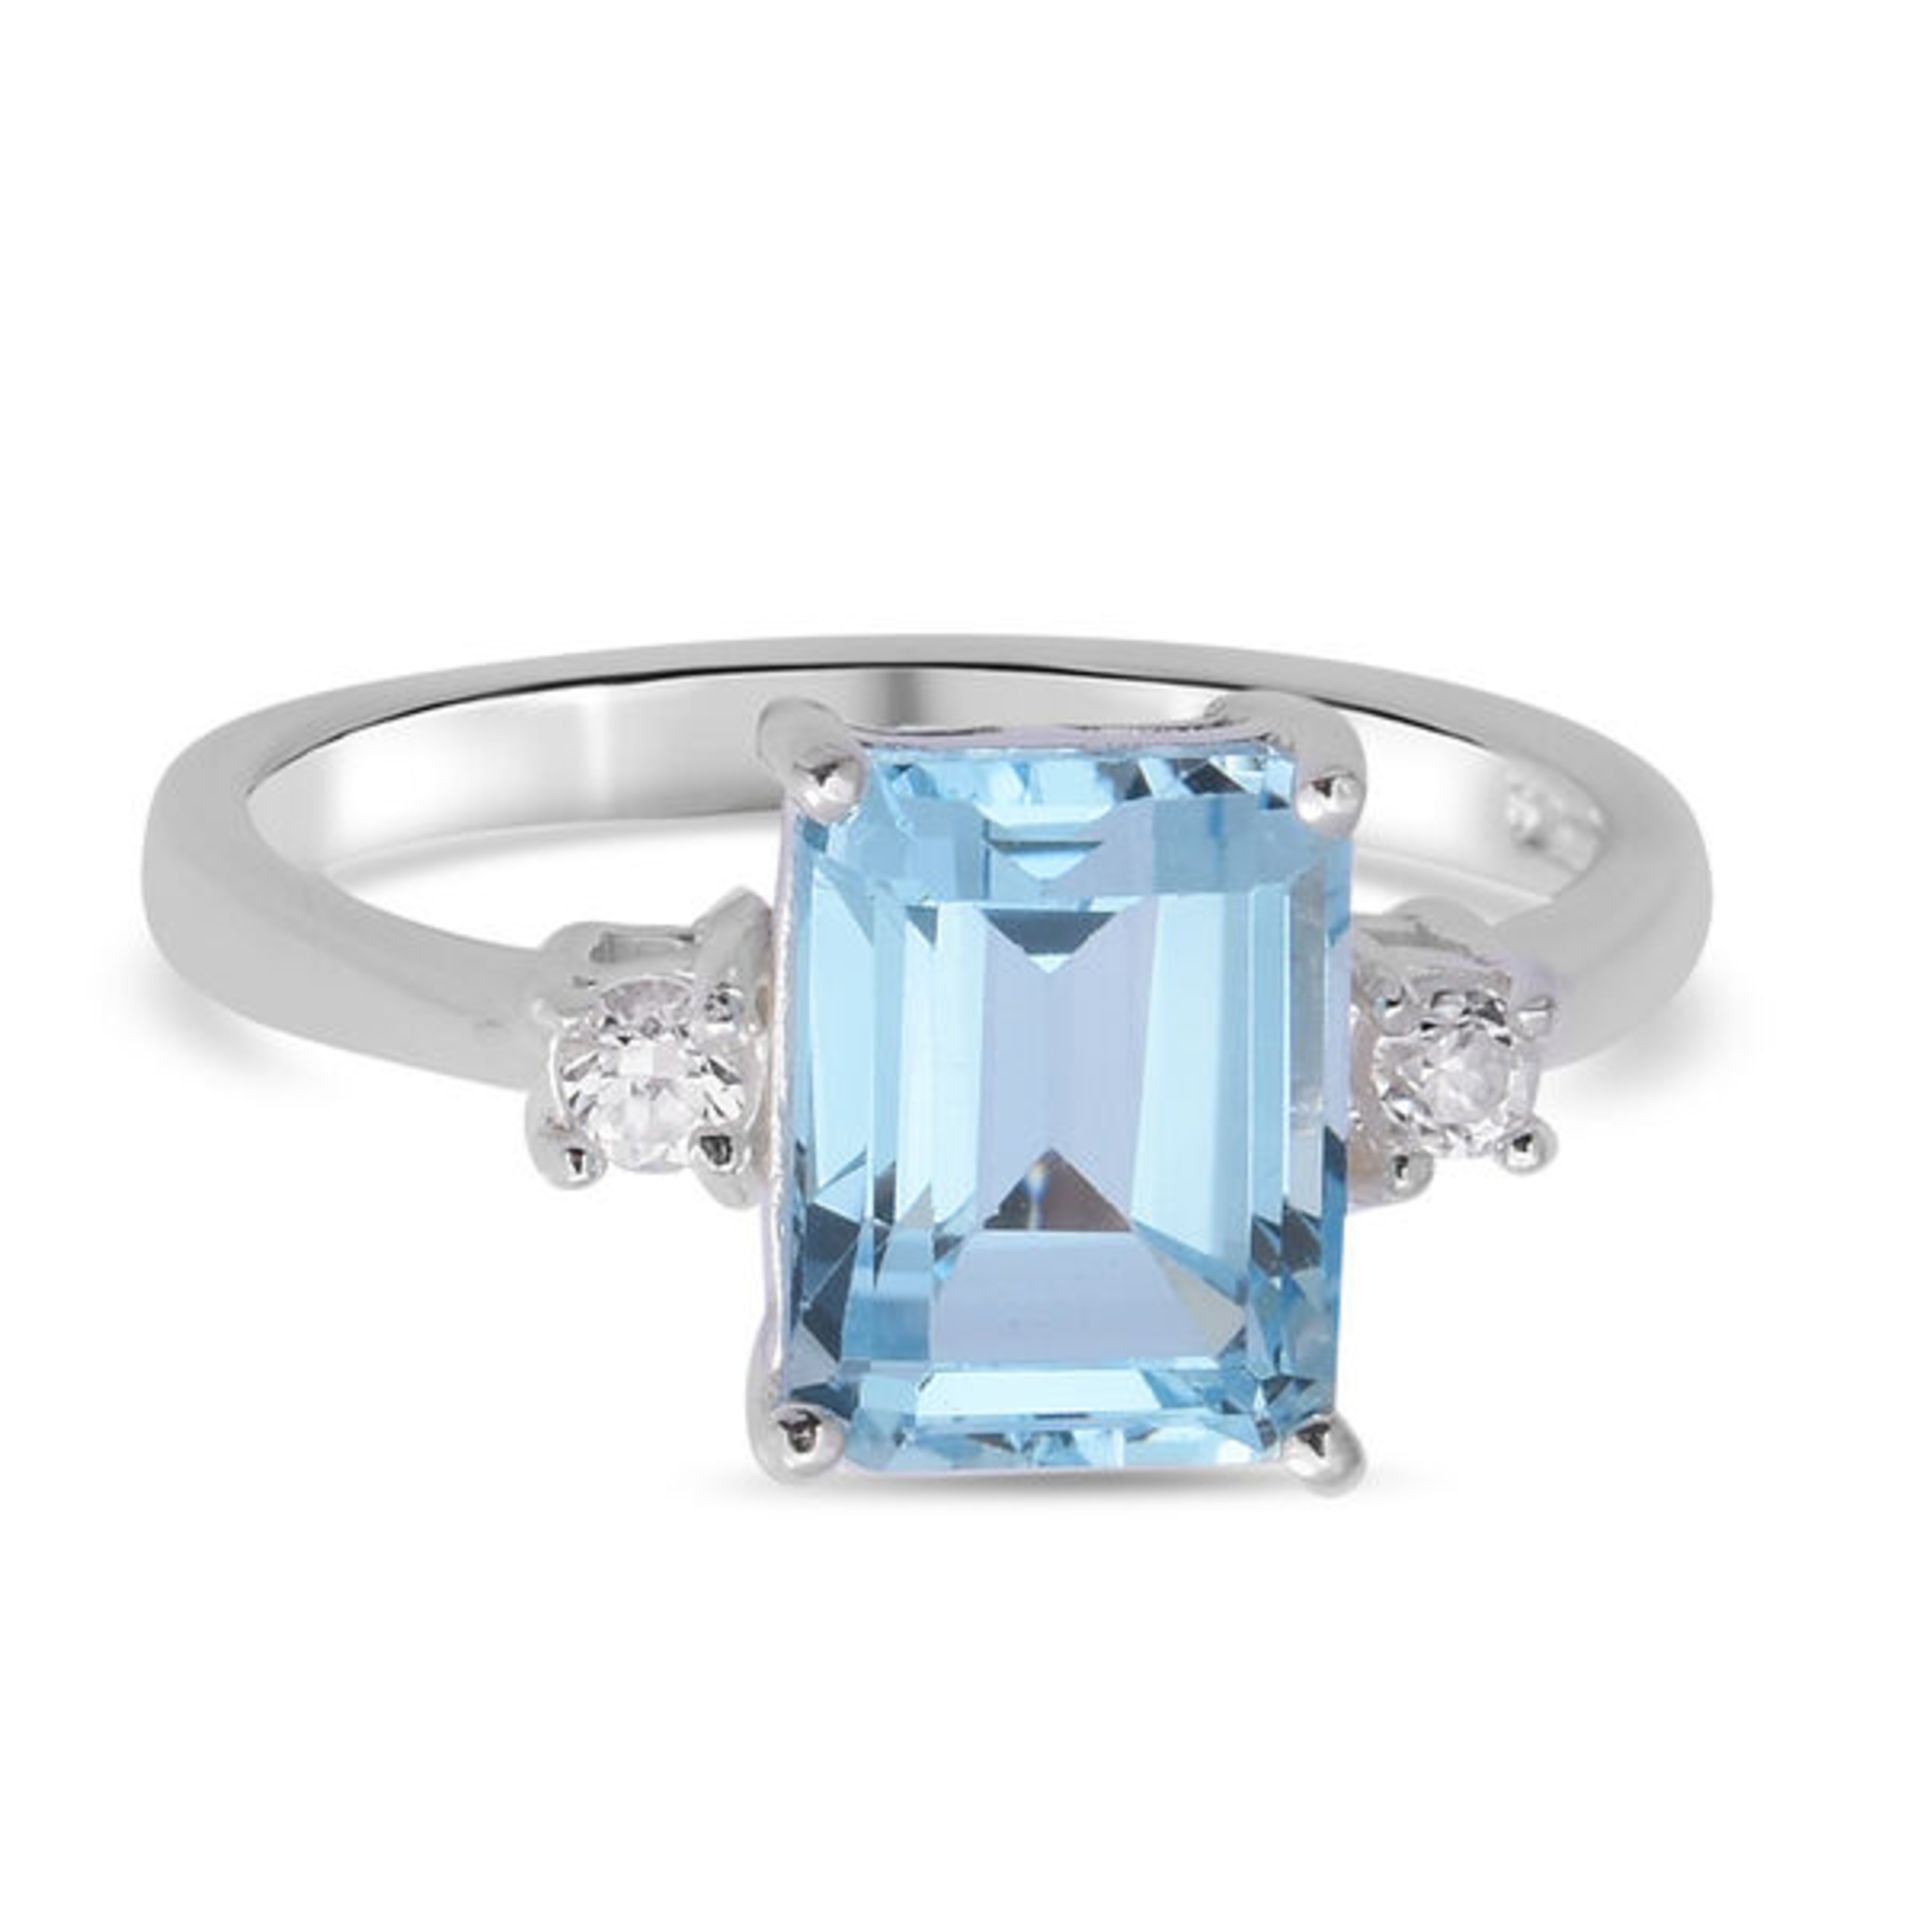 NEW!! Sterling Silver Sky Blue Topaz and Natural Cambodian Zircon Ring